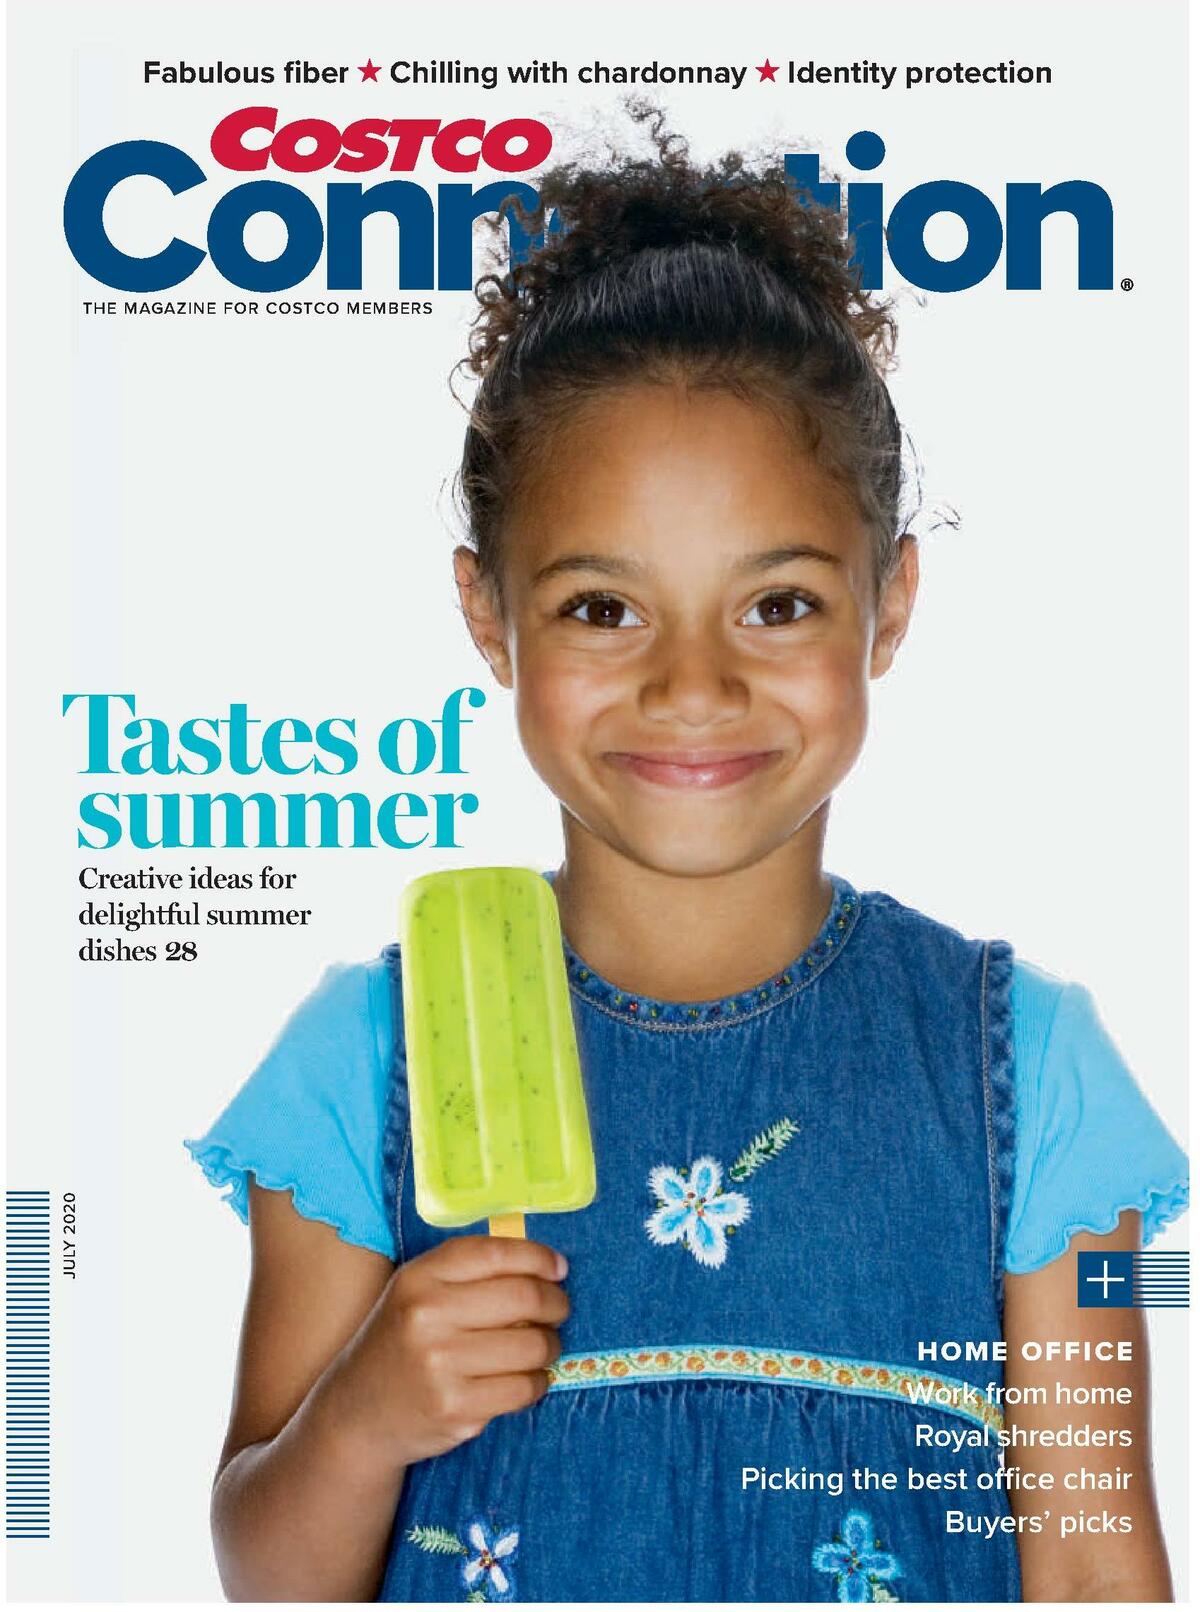 Costco Connection Special Buys and Warehouse Savings from July 1